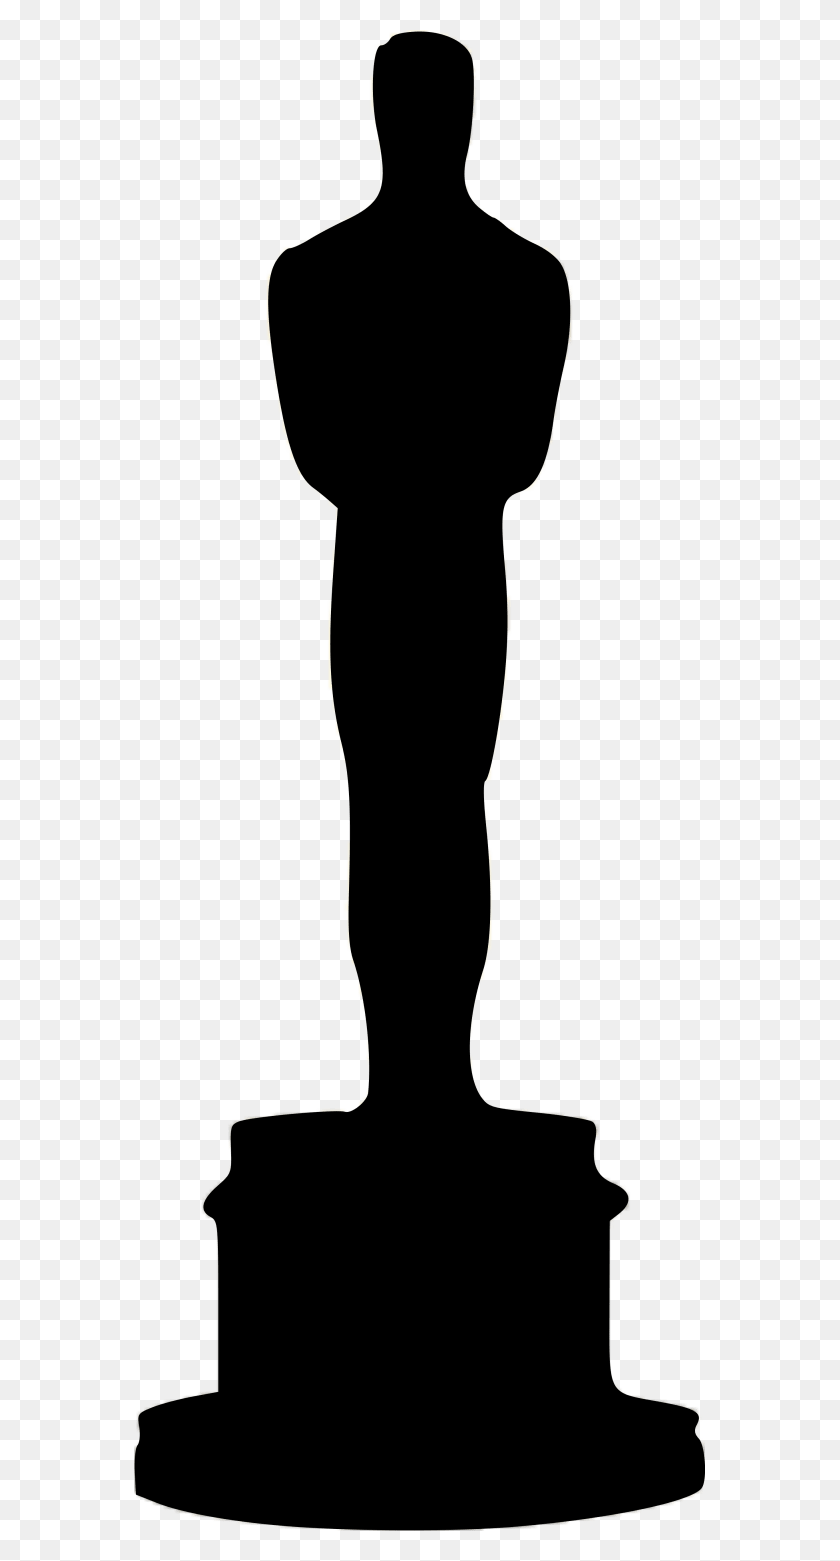 571x1501 Oscar Nominations Who Will Win, Who Should Win The Shield - Academy Award PNG